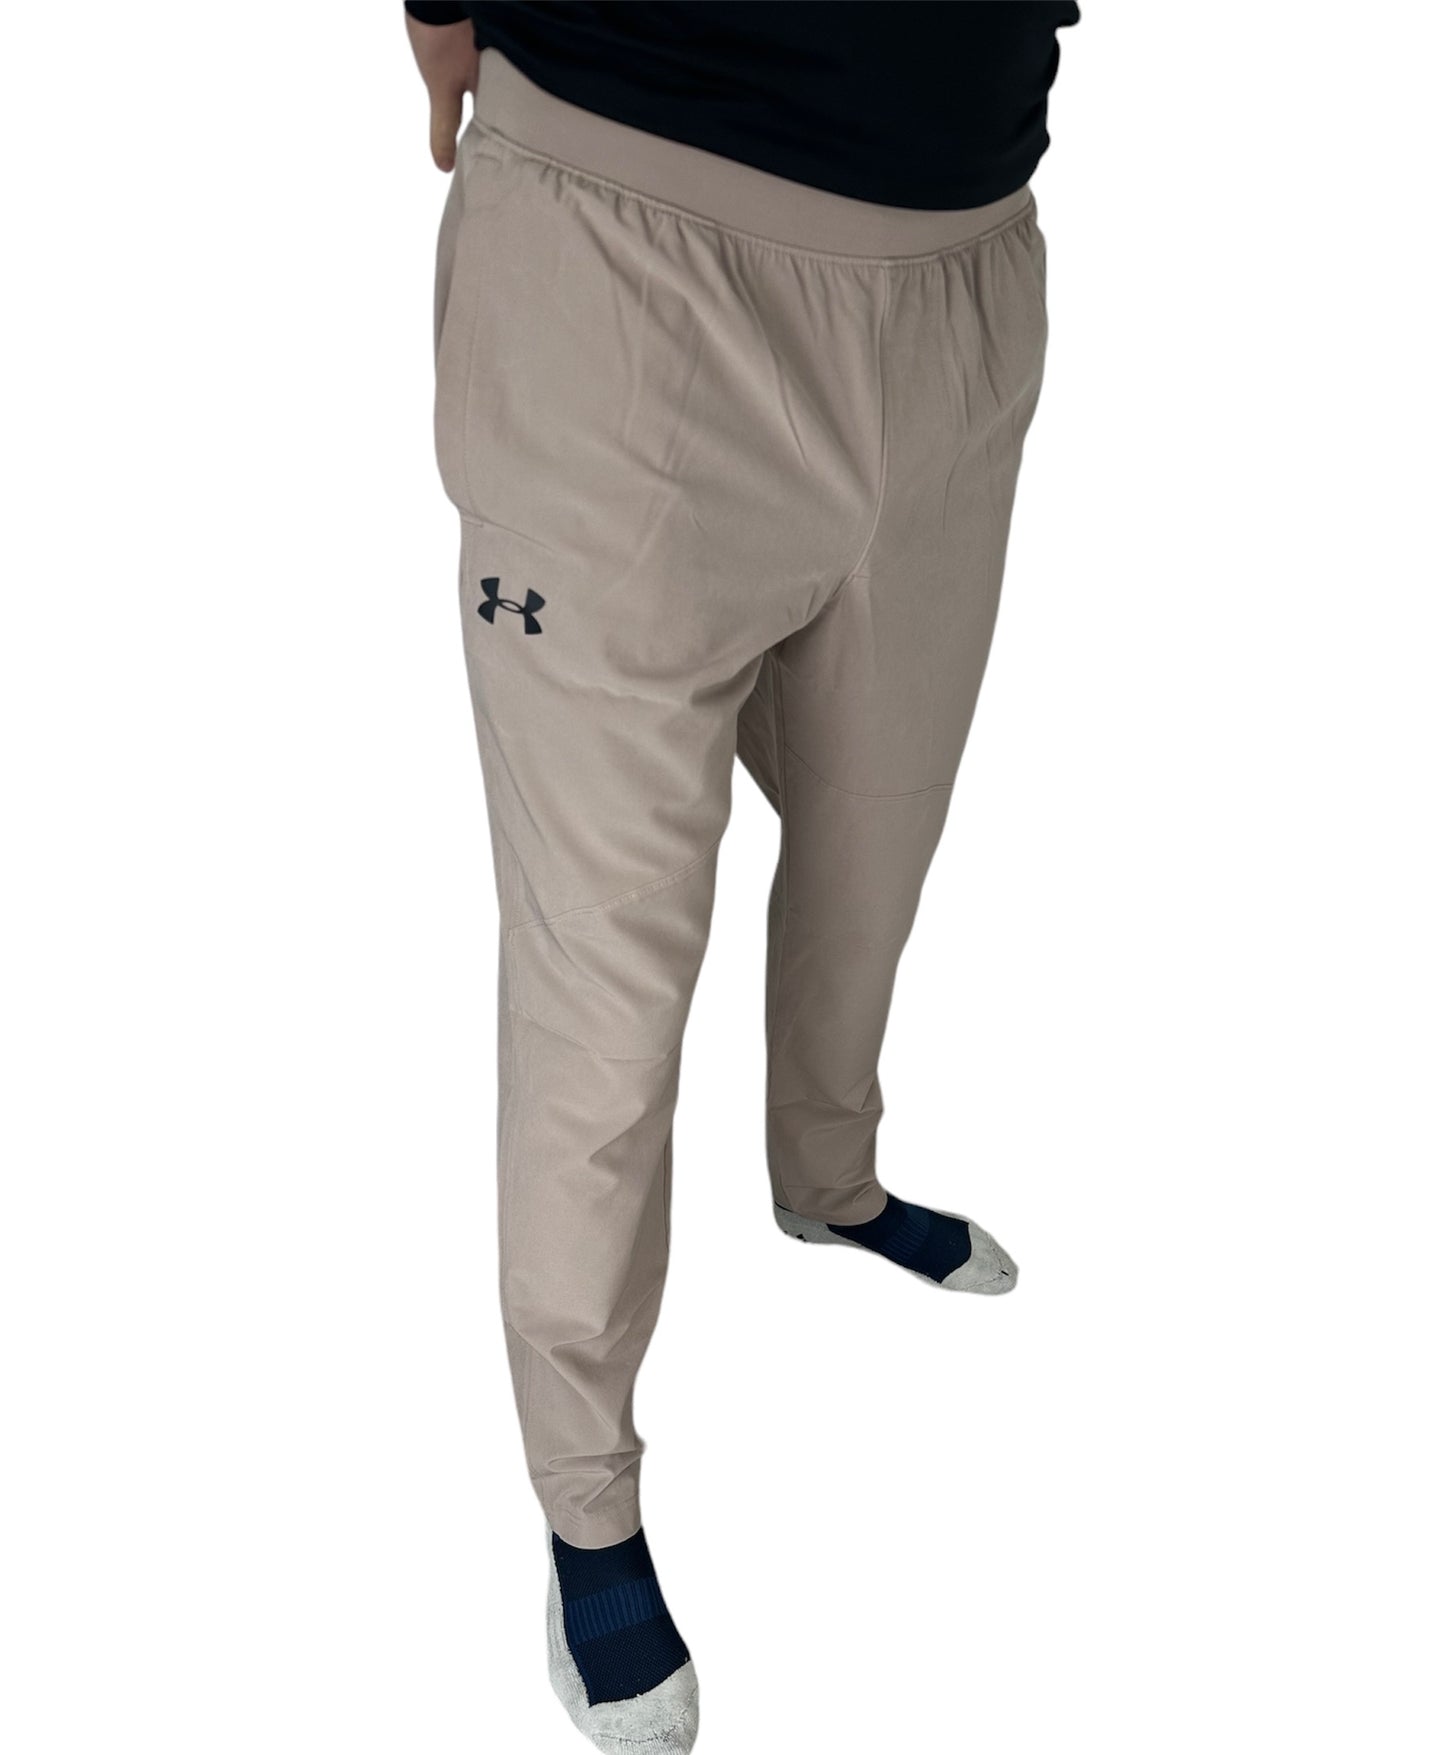 UNDER ARMOUR STRETCH WOVEN JOGGING PANTS - BROWN